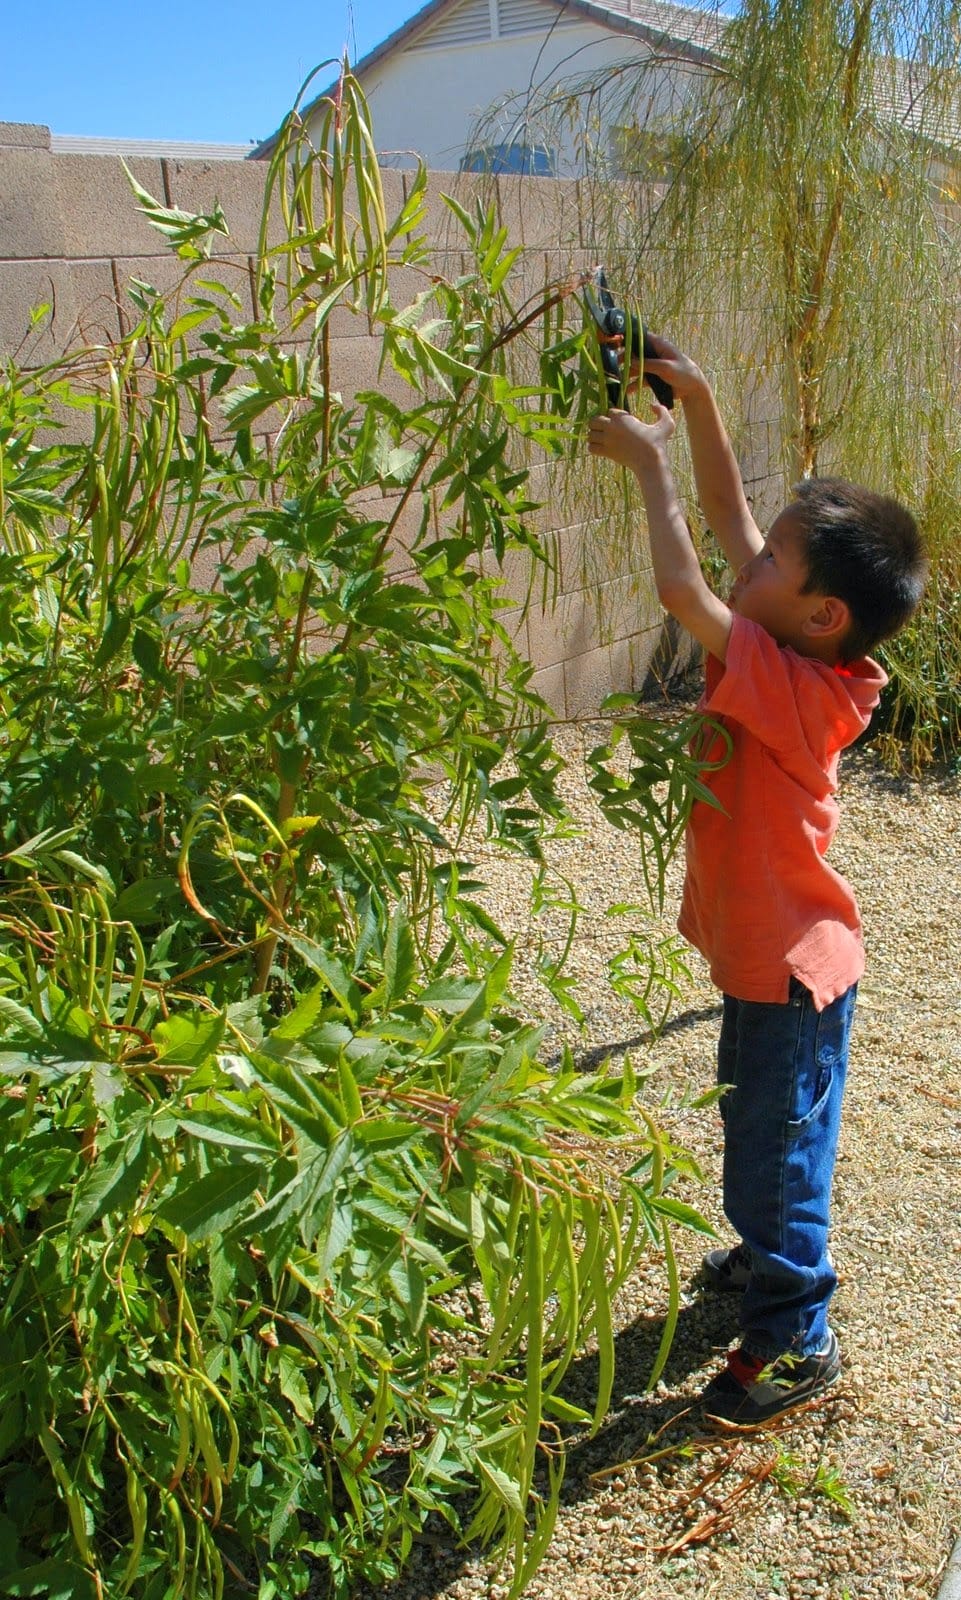 My son helping me prune several years ago